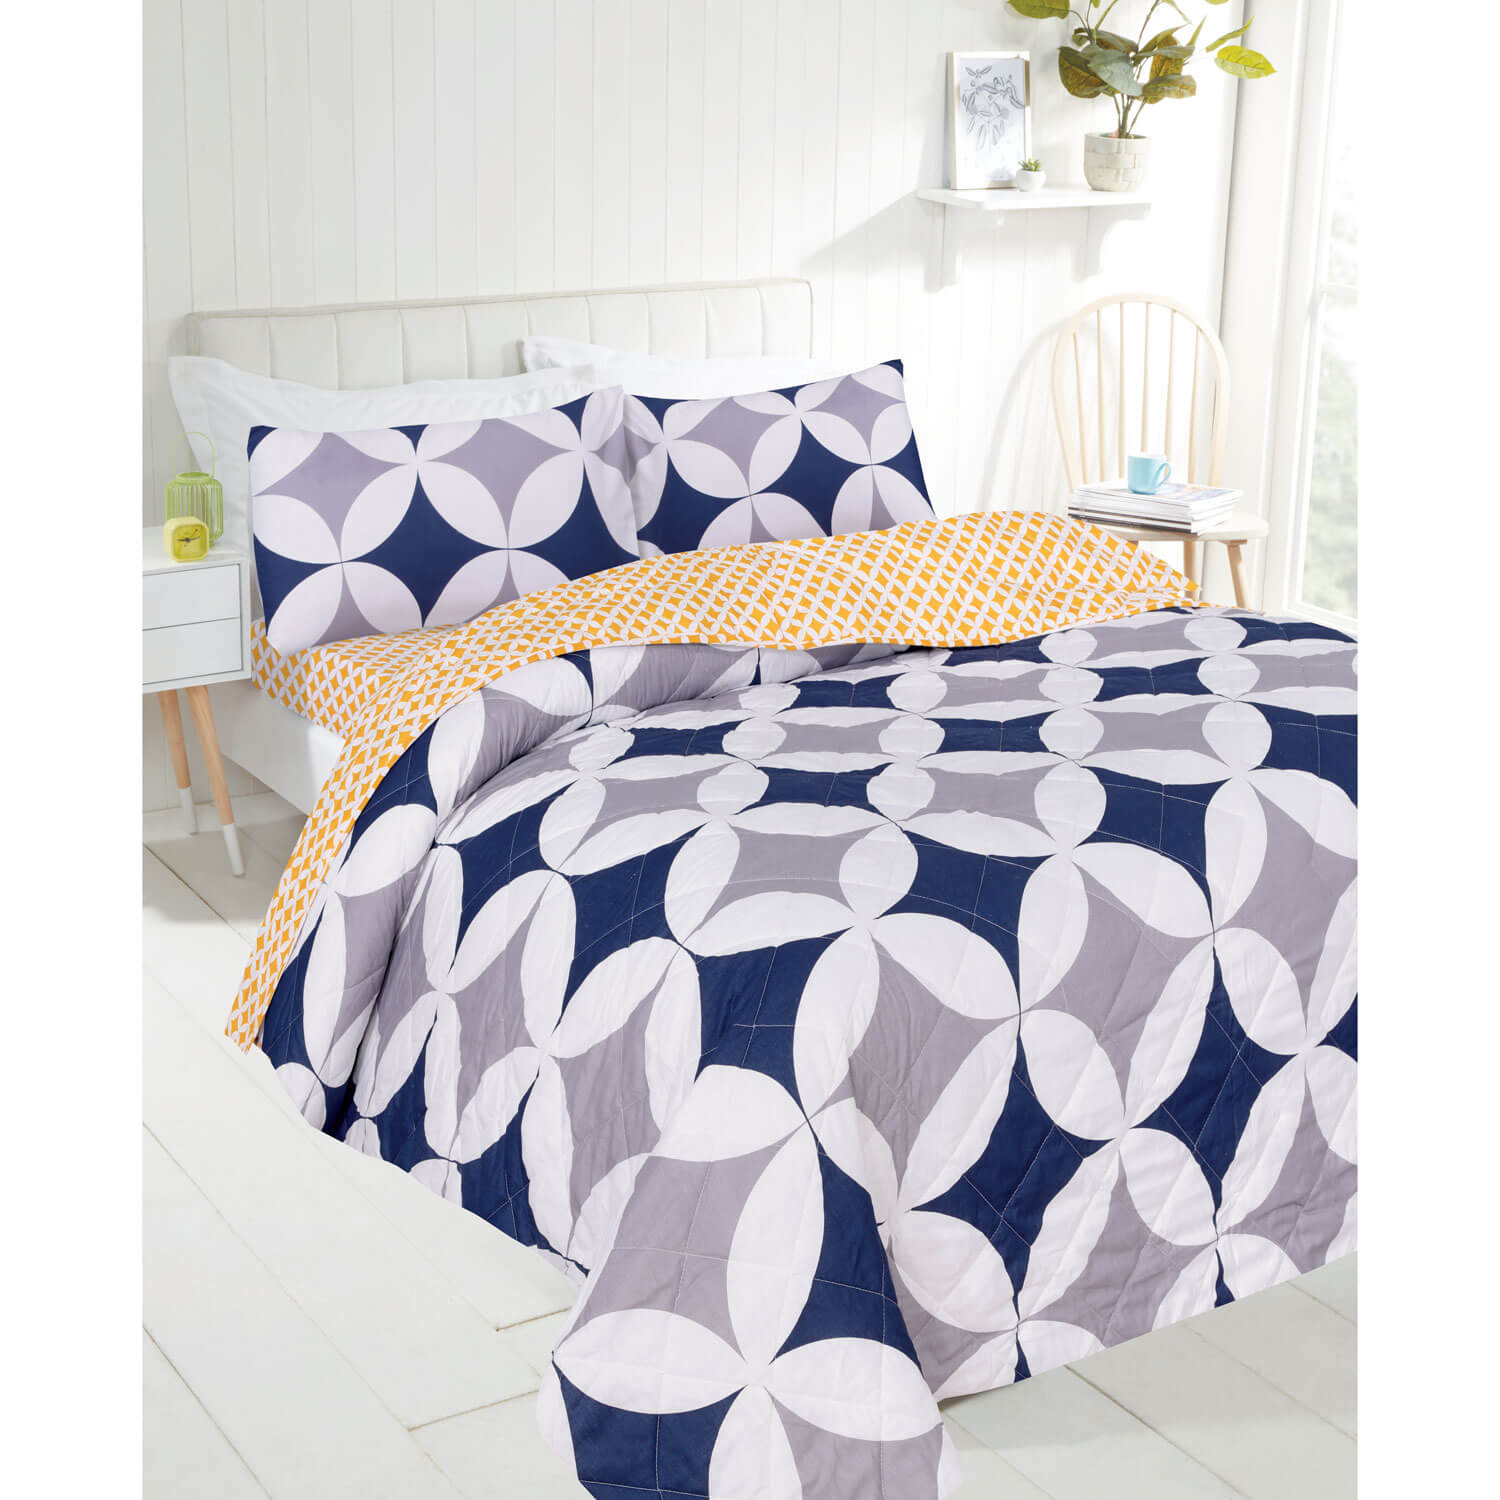 The Home Bedroom Geo Bedspread - Blue 1 Shaws Department Stores